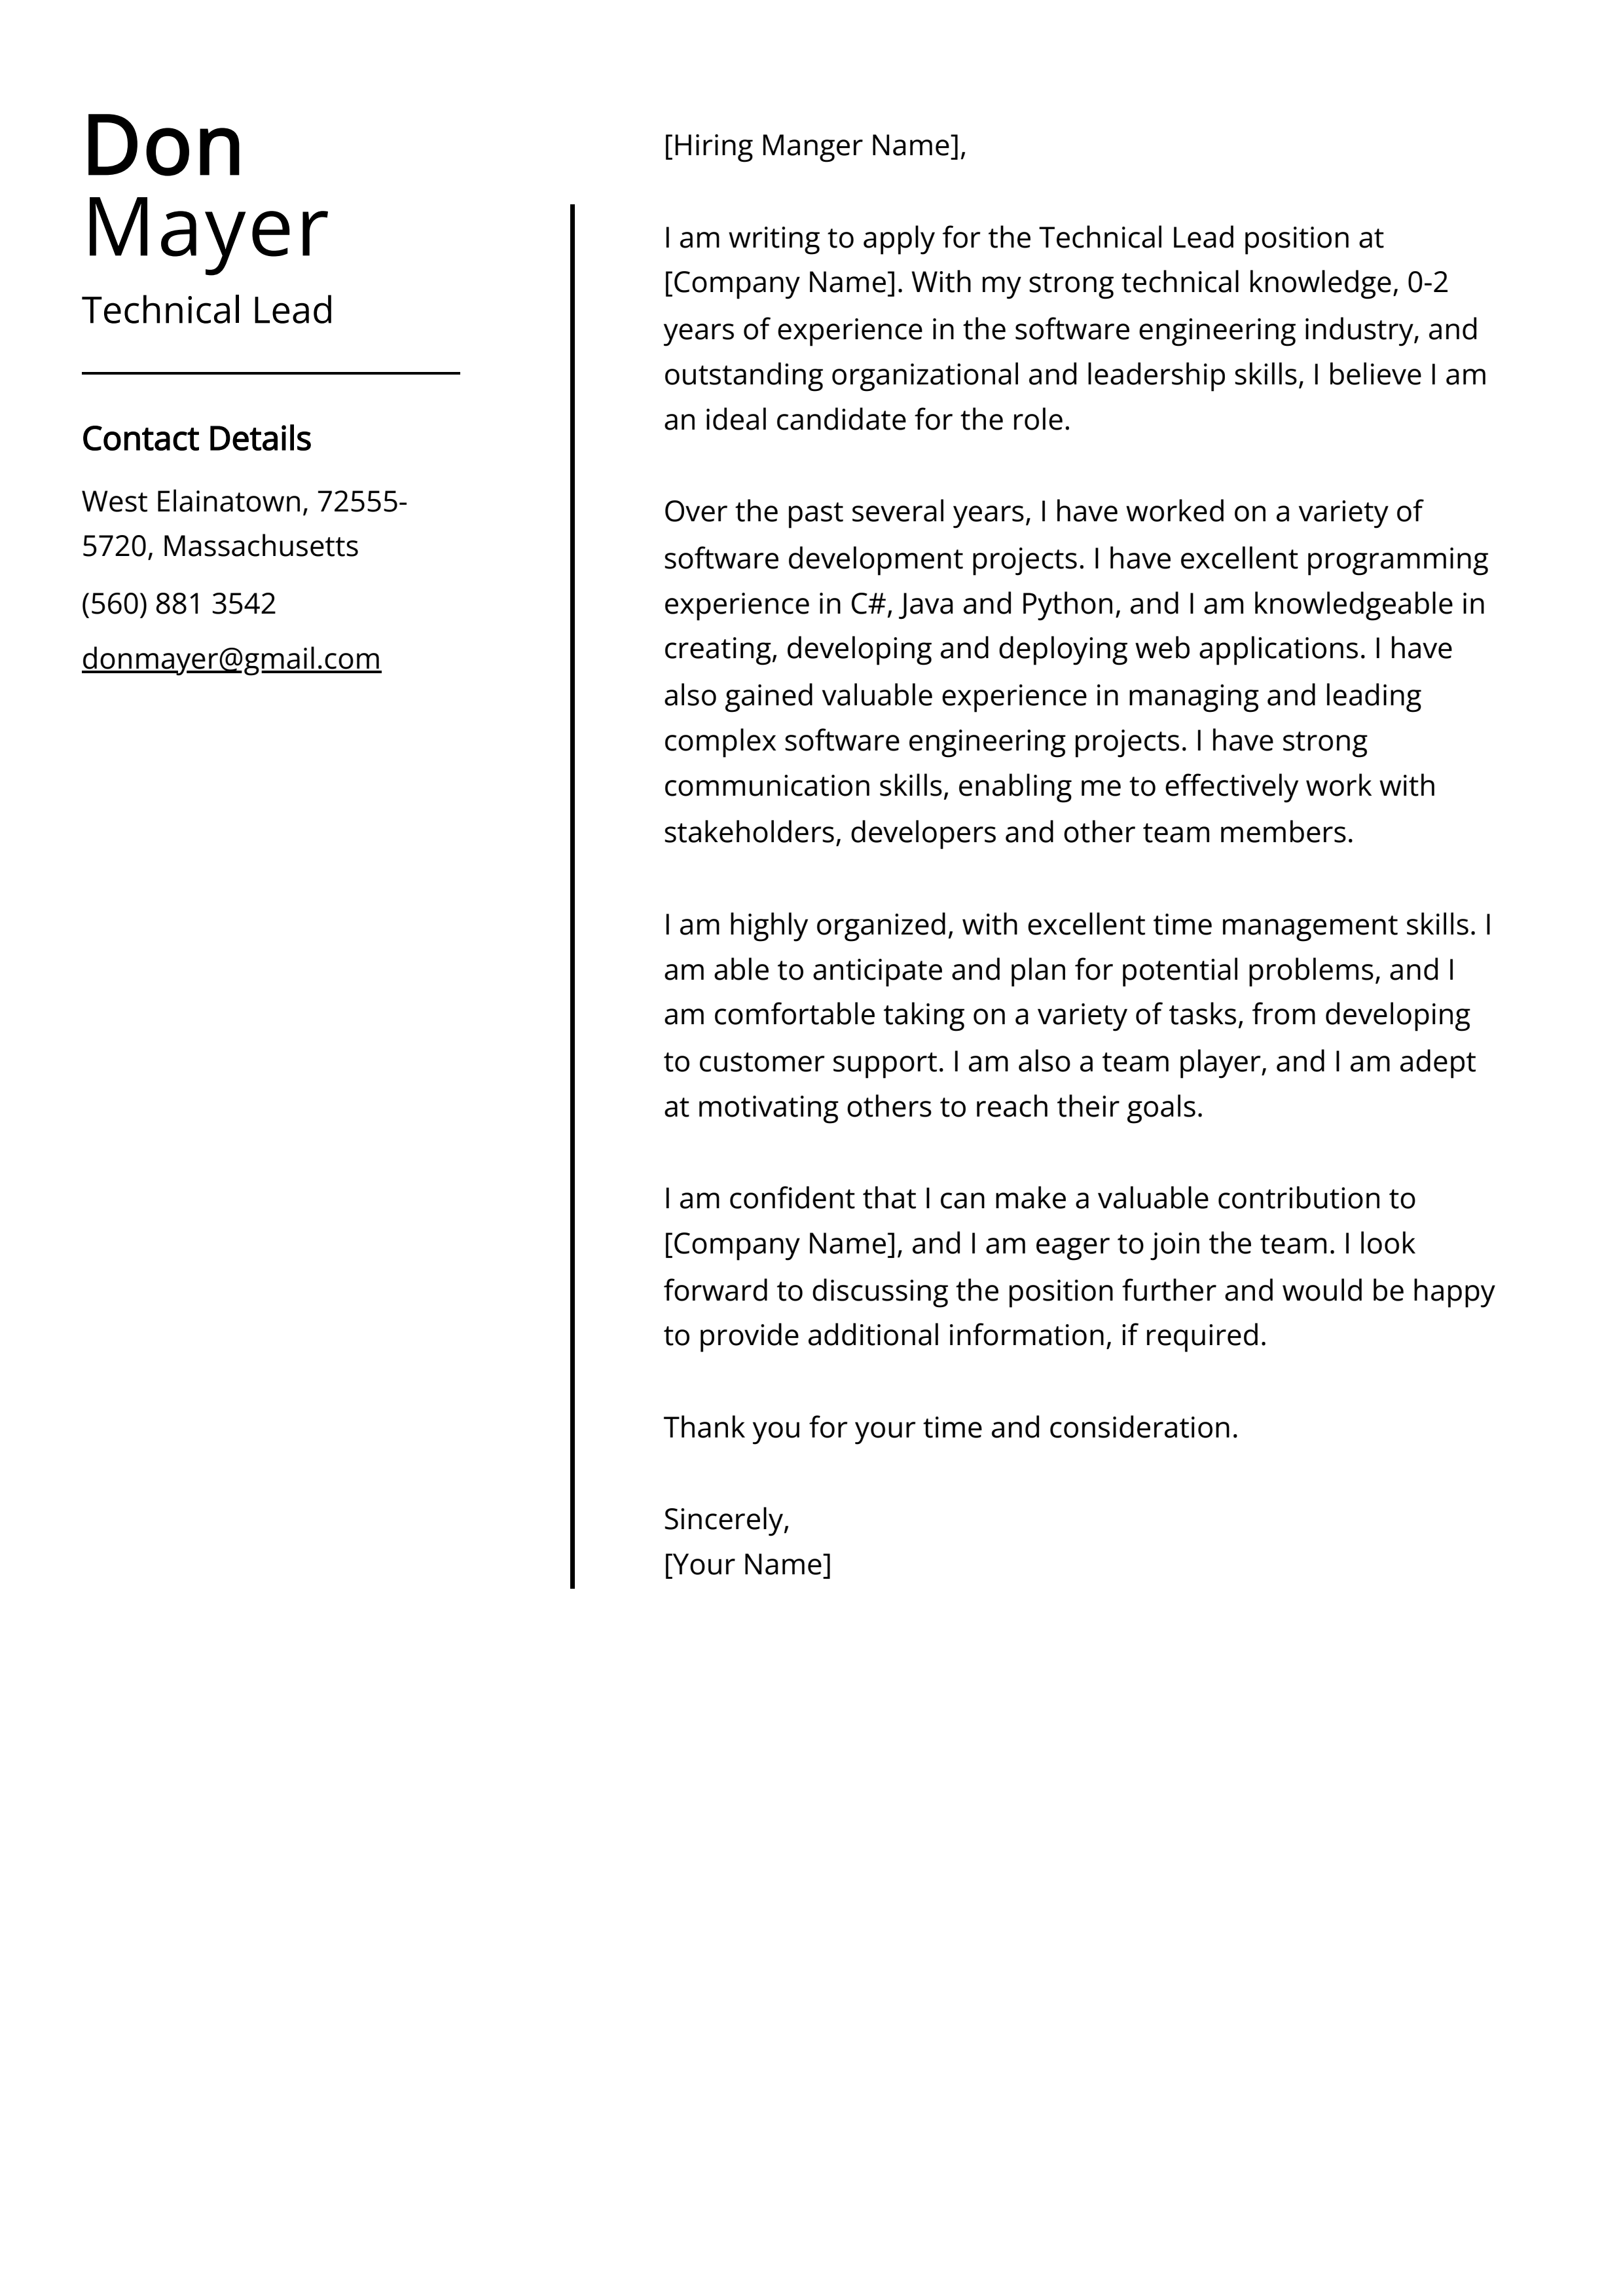 Technical Lead Cover Letter Example